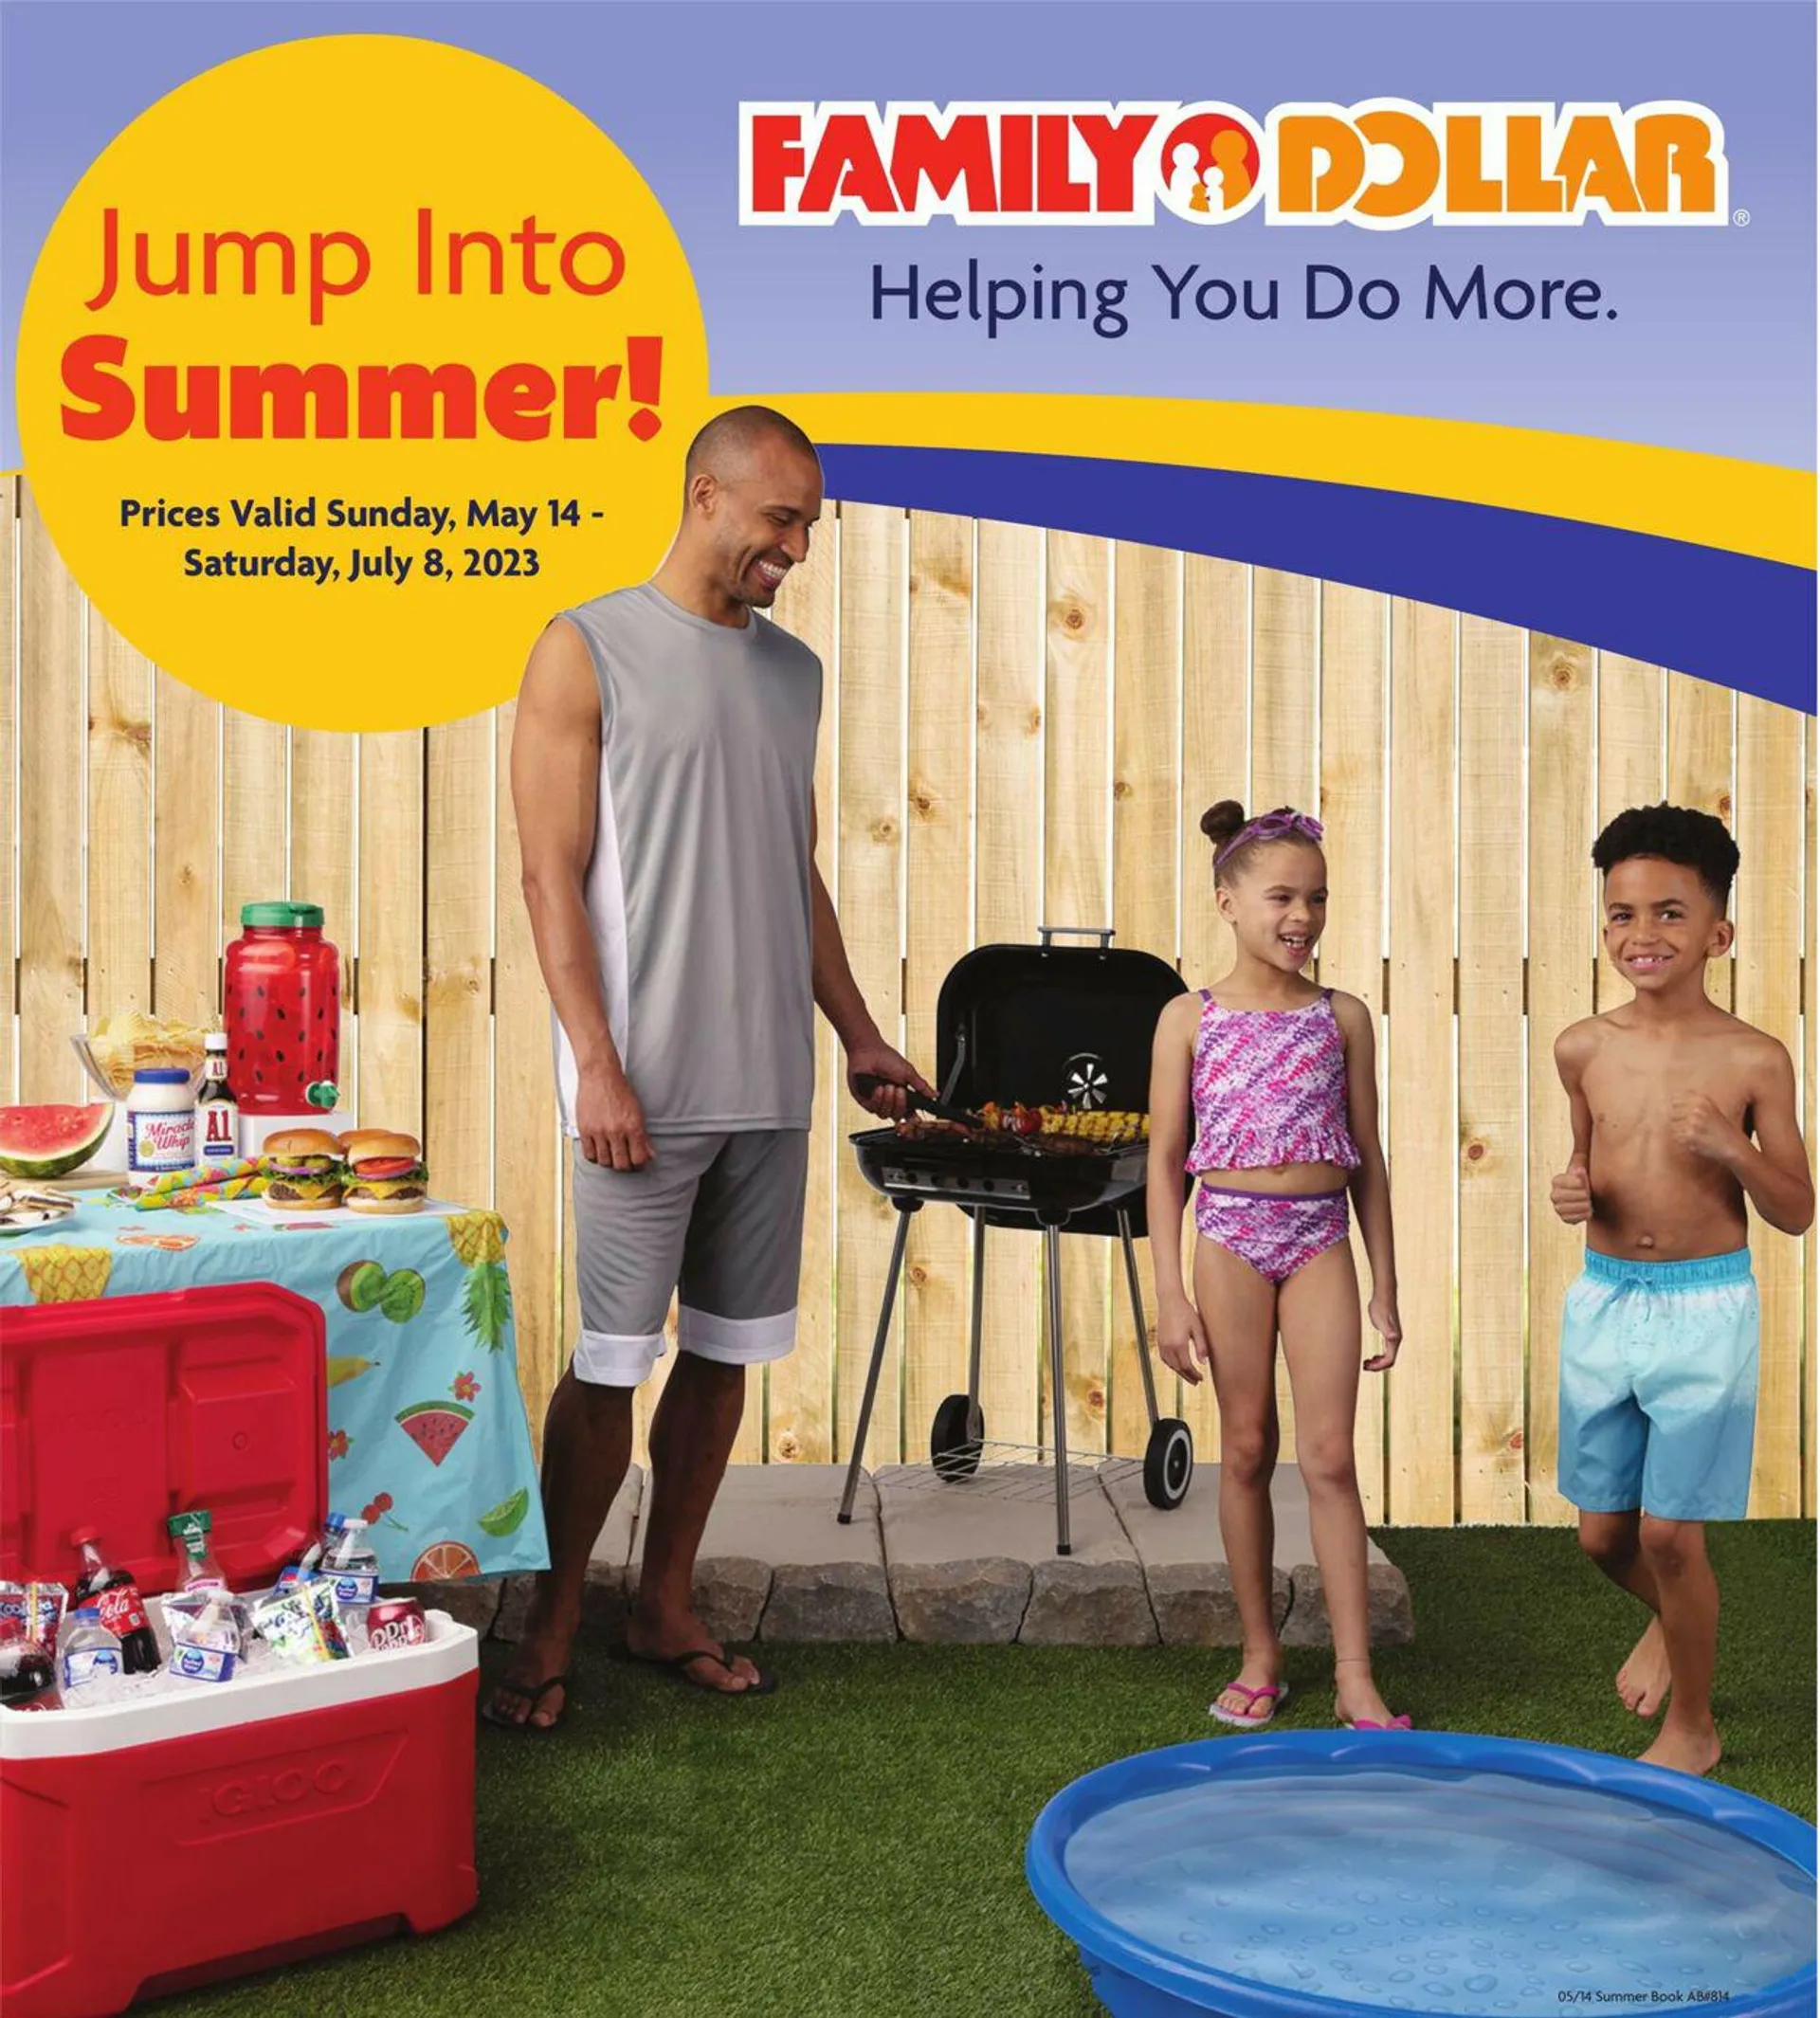 Family Dollar Current weekly ad - 1